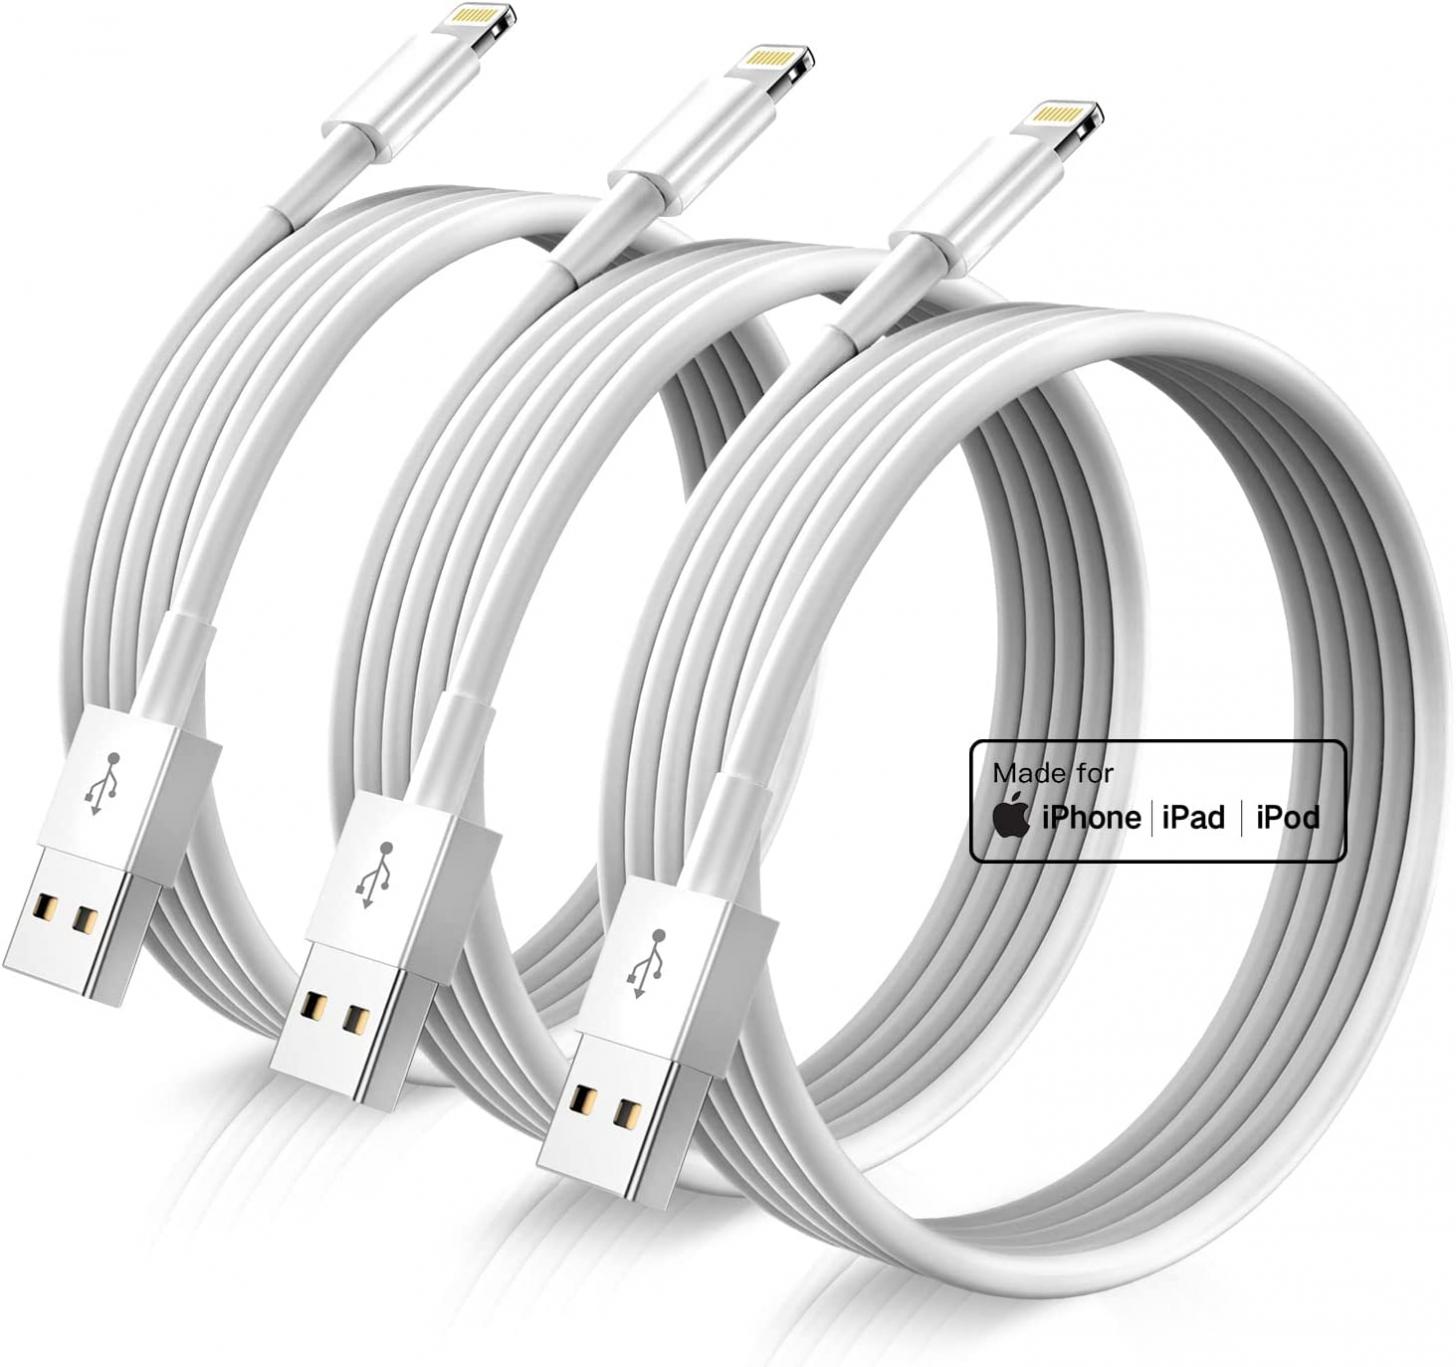 iPhone Charger Cord Lightning Cables, Original 2022 Upgraded [3Pack 6ft] Apple MFi Certified USB A Charging Cable for iPhone 13 12 11 Mini Pro XR Xs Max X SE 8 7 6 Plus iPad iPod AirPods - White